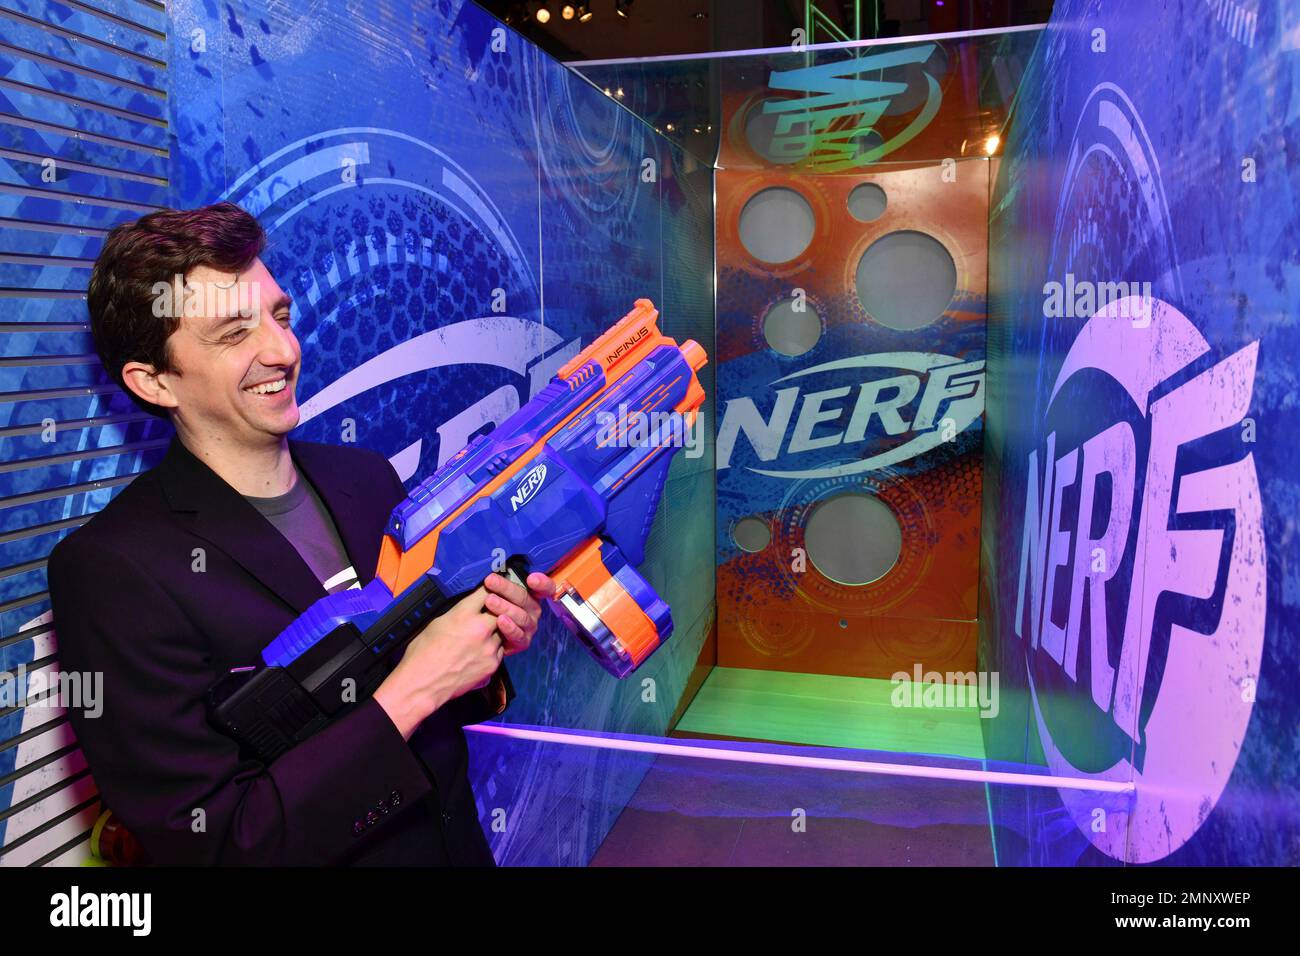 IMAGE DISTRIBUTED FOR HASBRO, INC. - A demonstrator at the Hasbro, Inc. showroom fires the NERF N-STRIKE ELITE INFINUS blaster at American International Toy Fai on Feb. 16, 2018 in